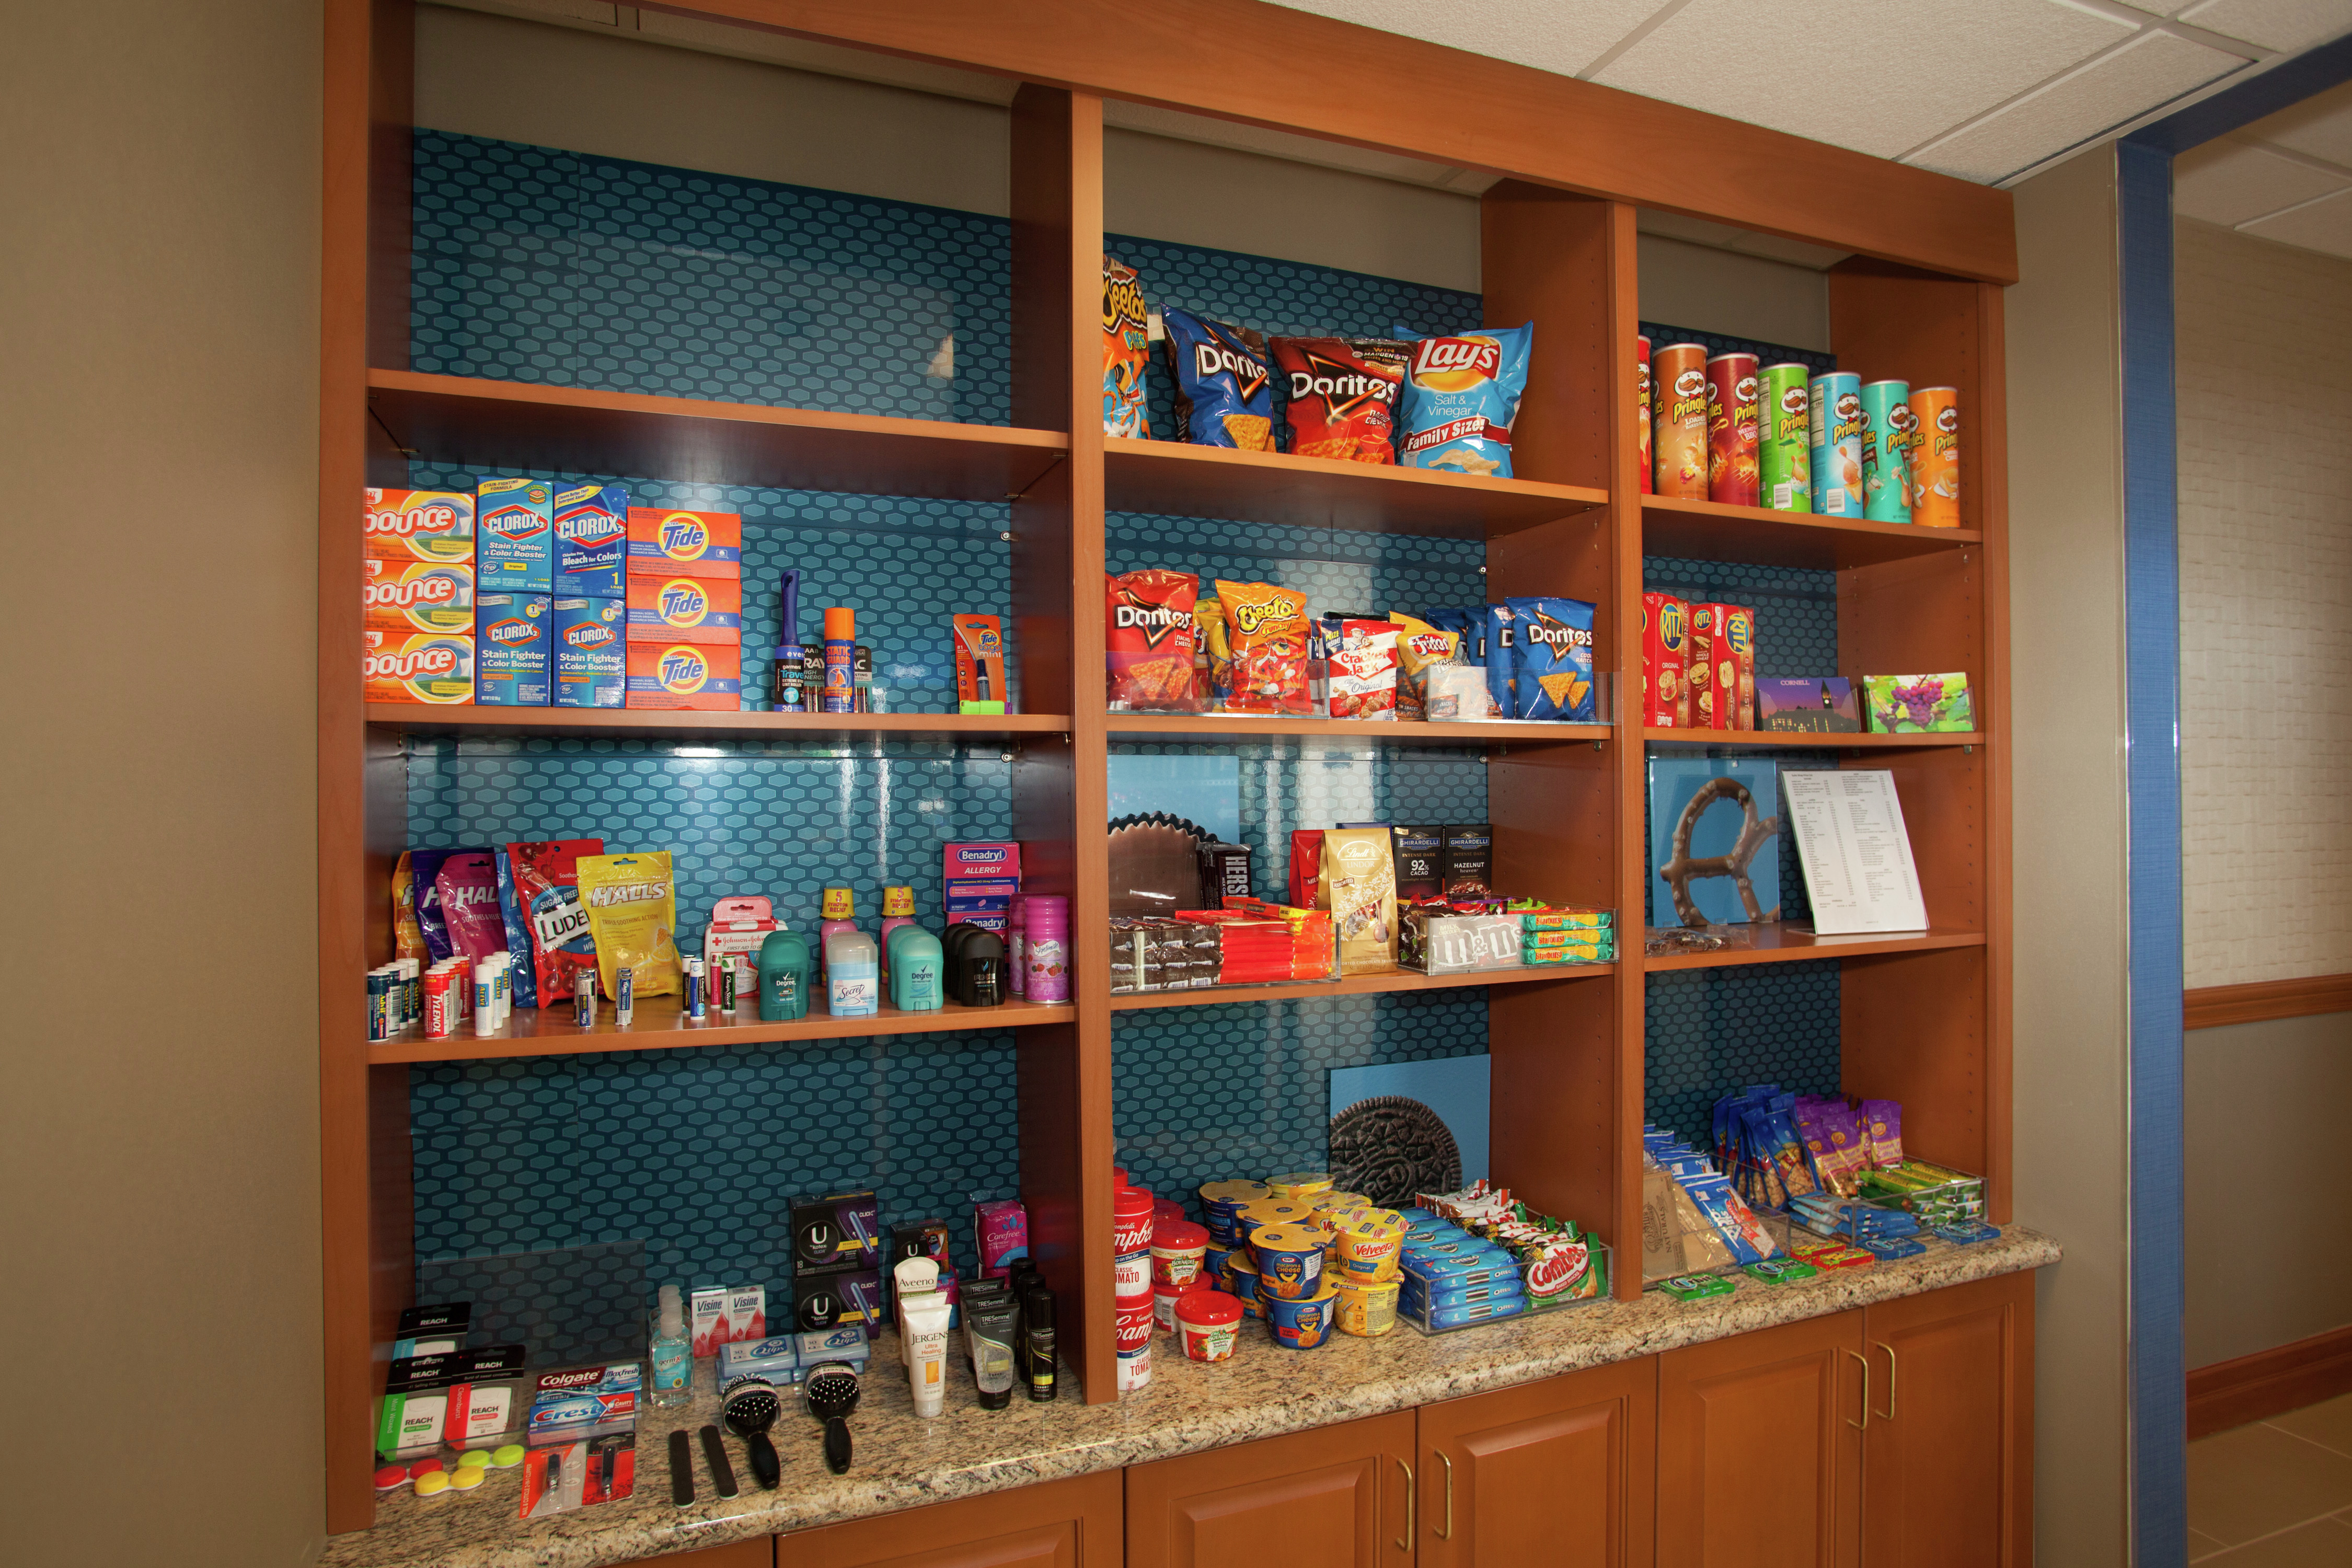 Snacks, Toiletries, and Other Items on Display in 24-Hour Convenience Shop